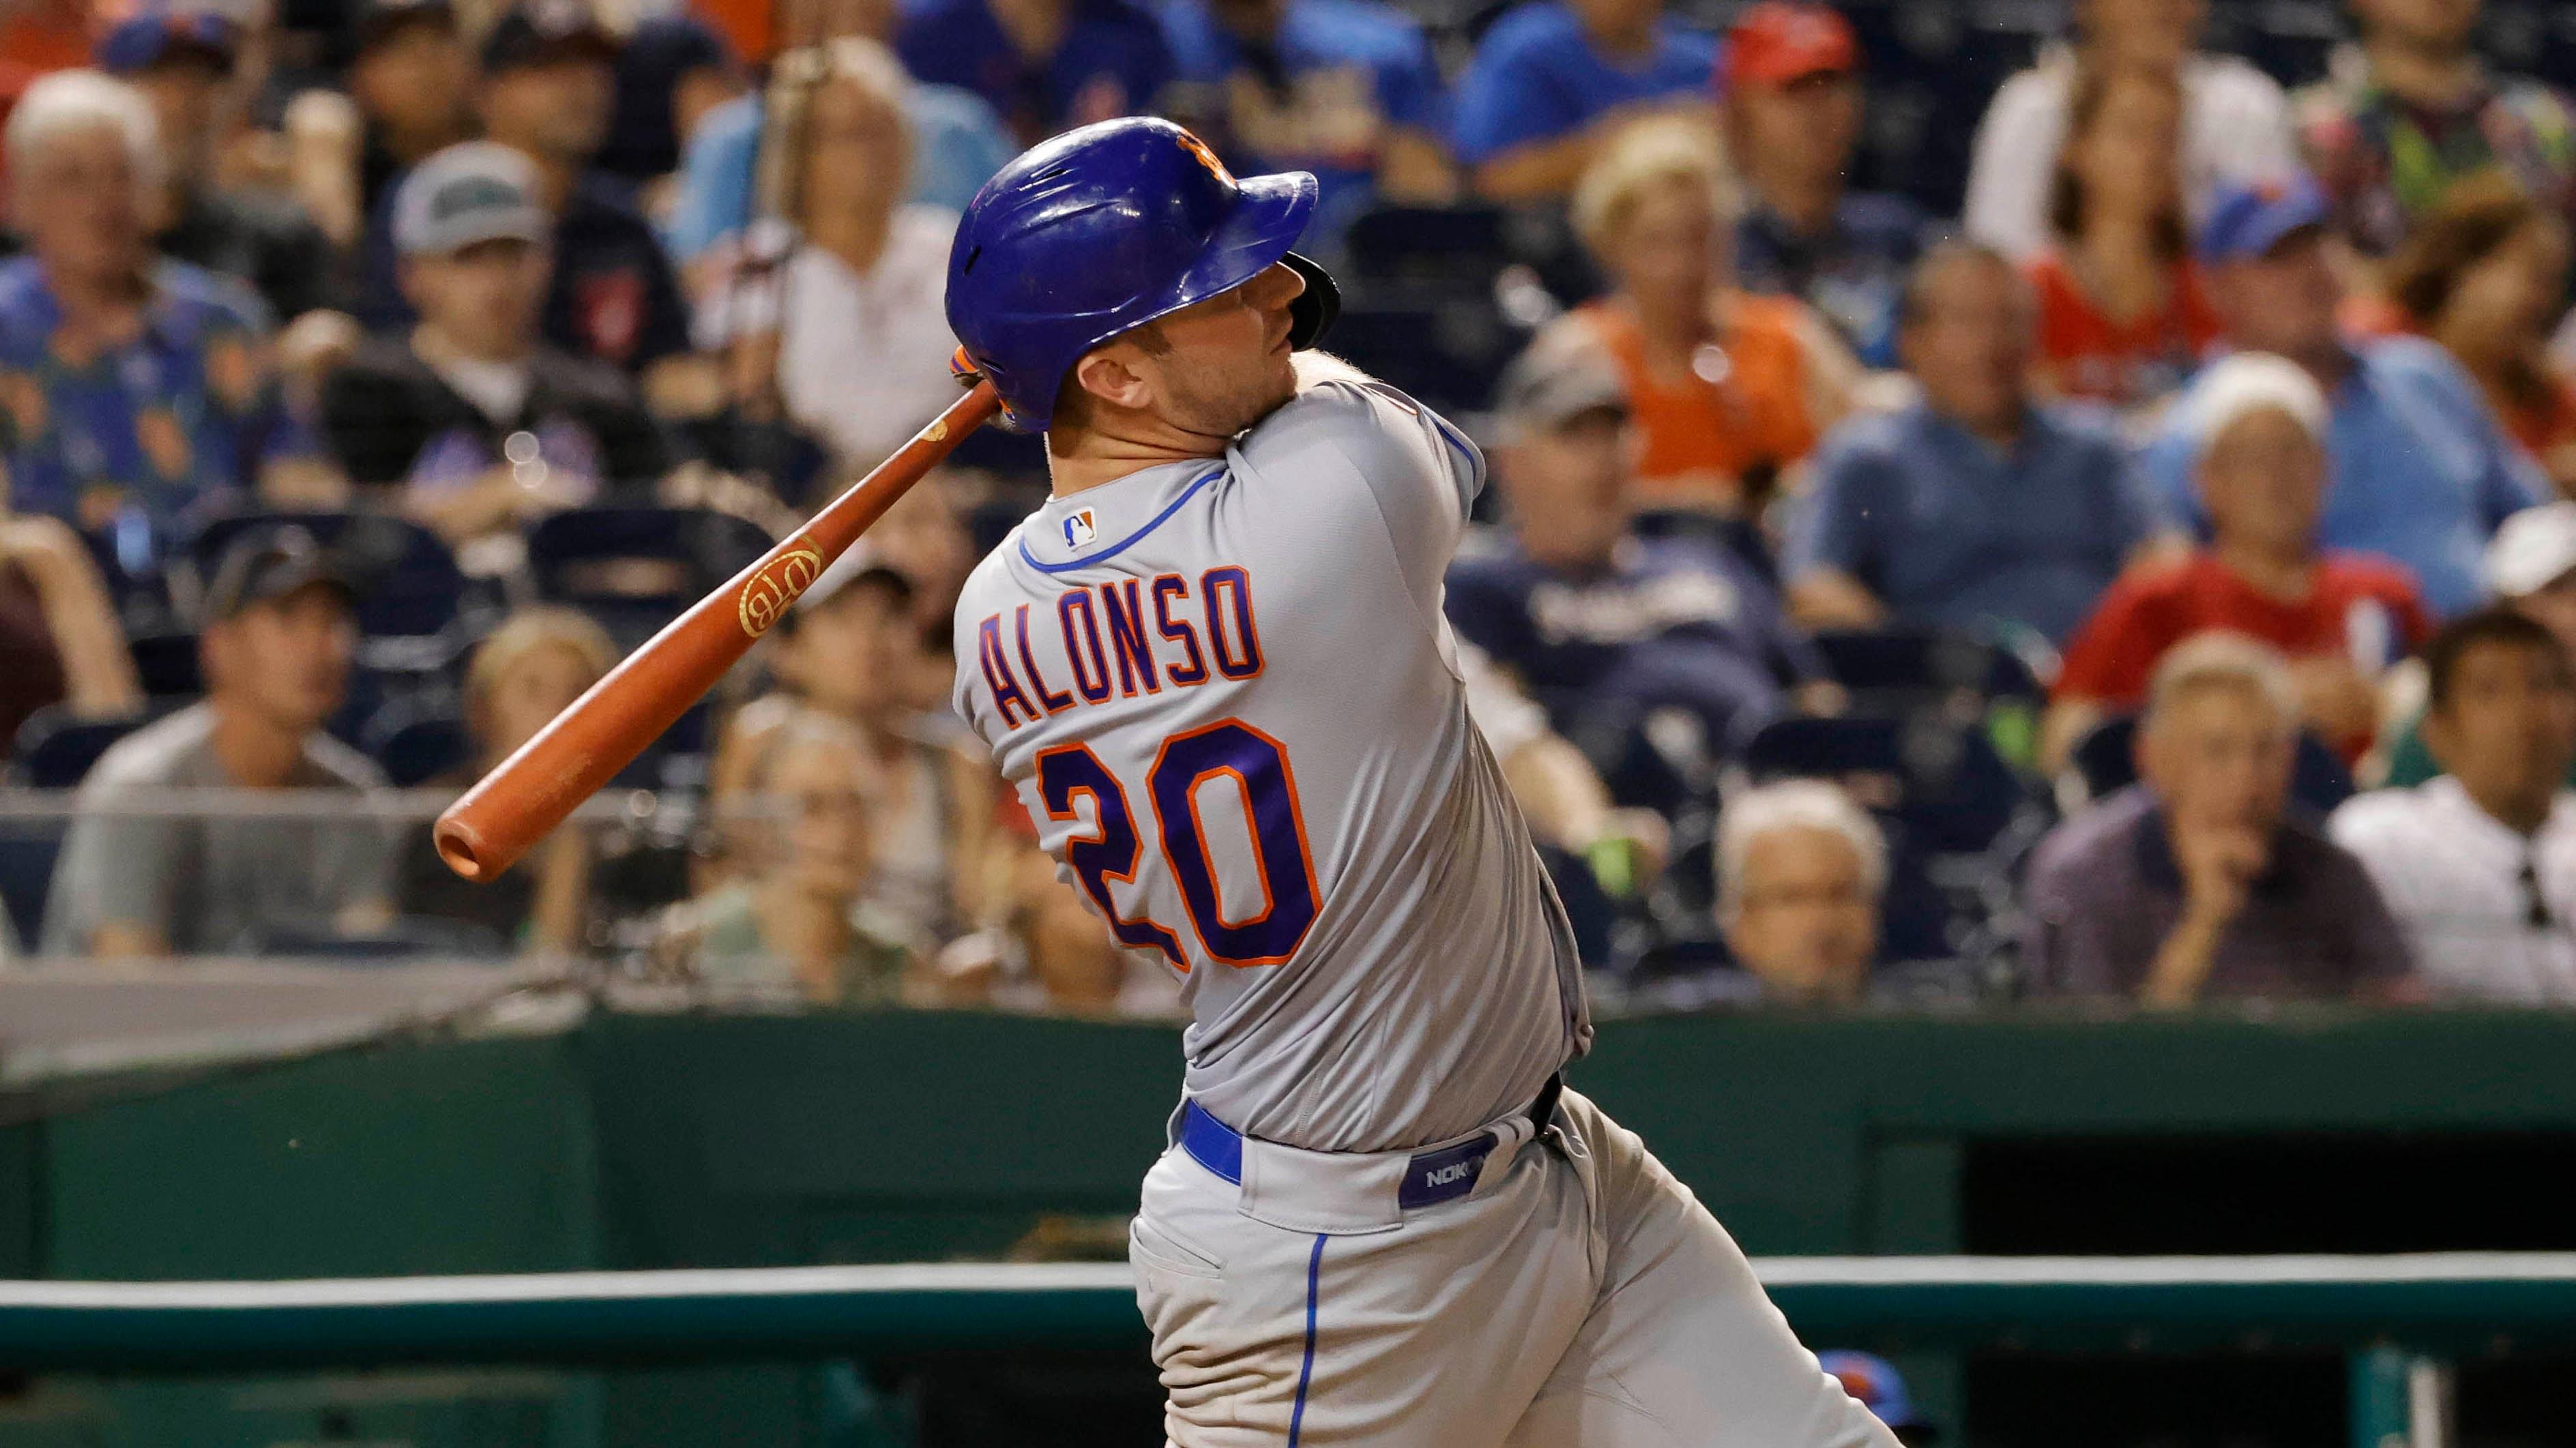 Jun 28, 2021; Washington, District of Columbia, USA; New York Mets first baseman Pete Alonso (20) hits a two run home run against the Washington Nationals in the eighth inning at Nationals Park. / Geoff Burke-USA TODAY Sports